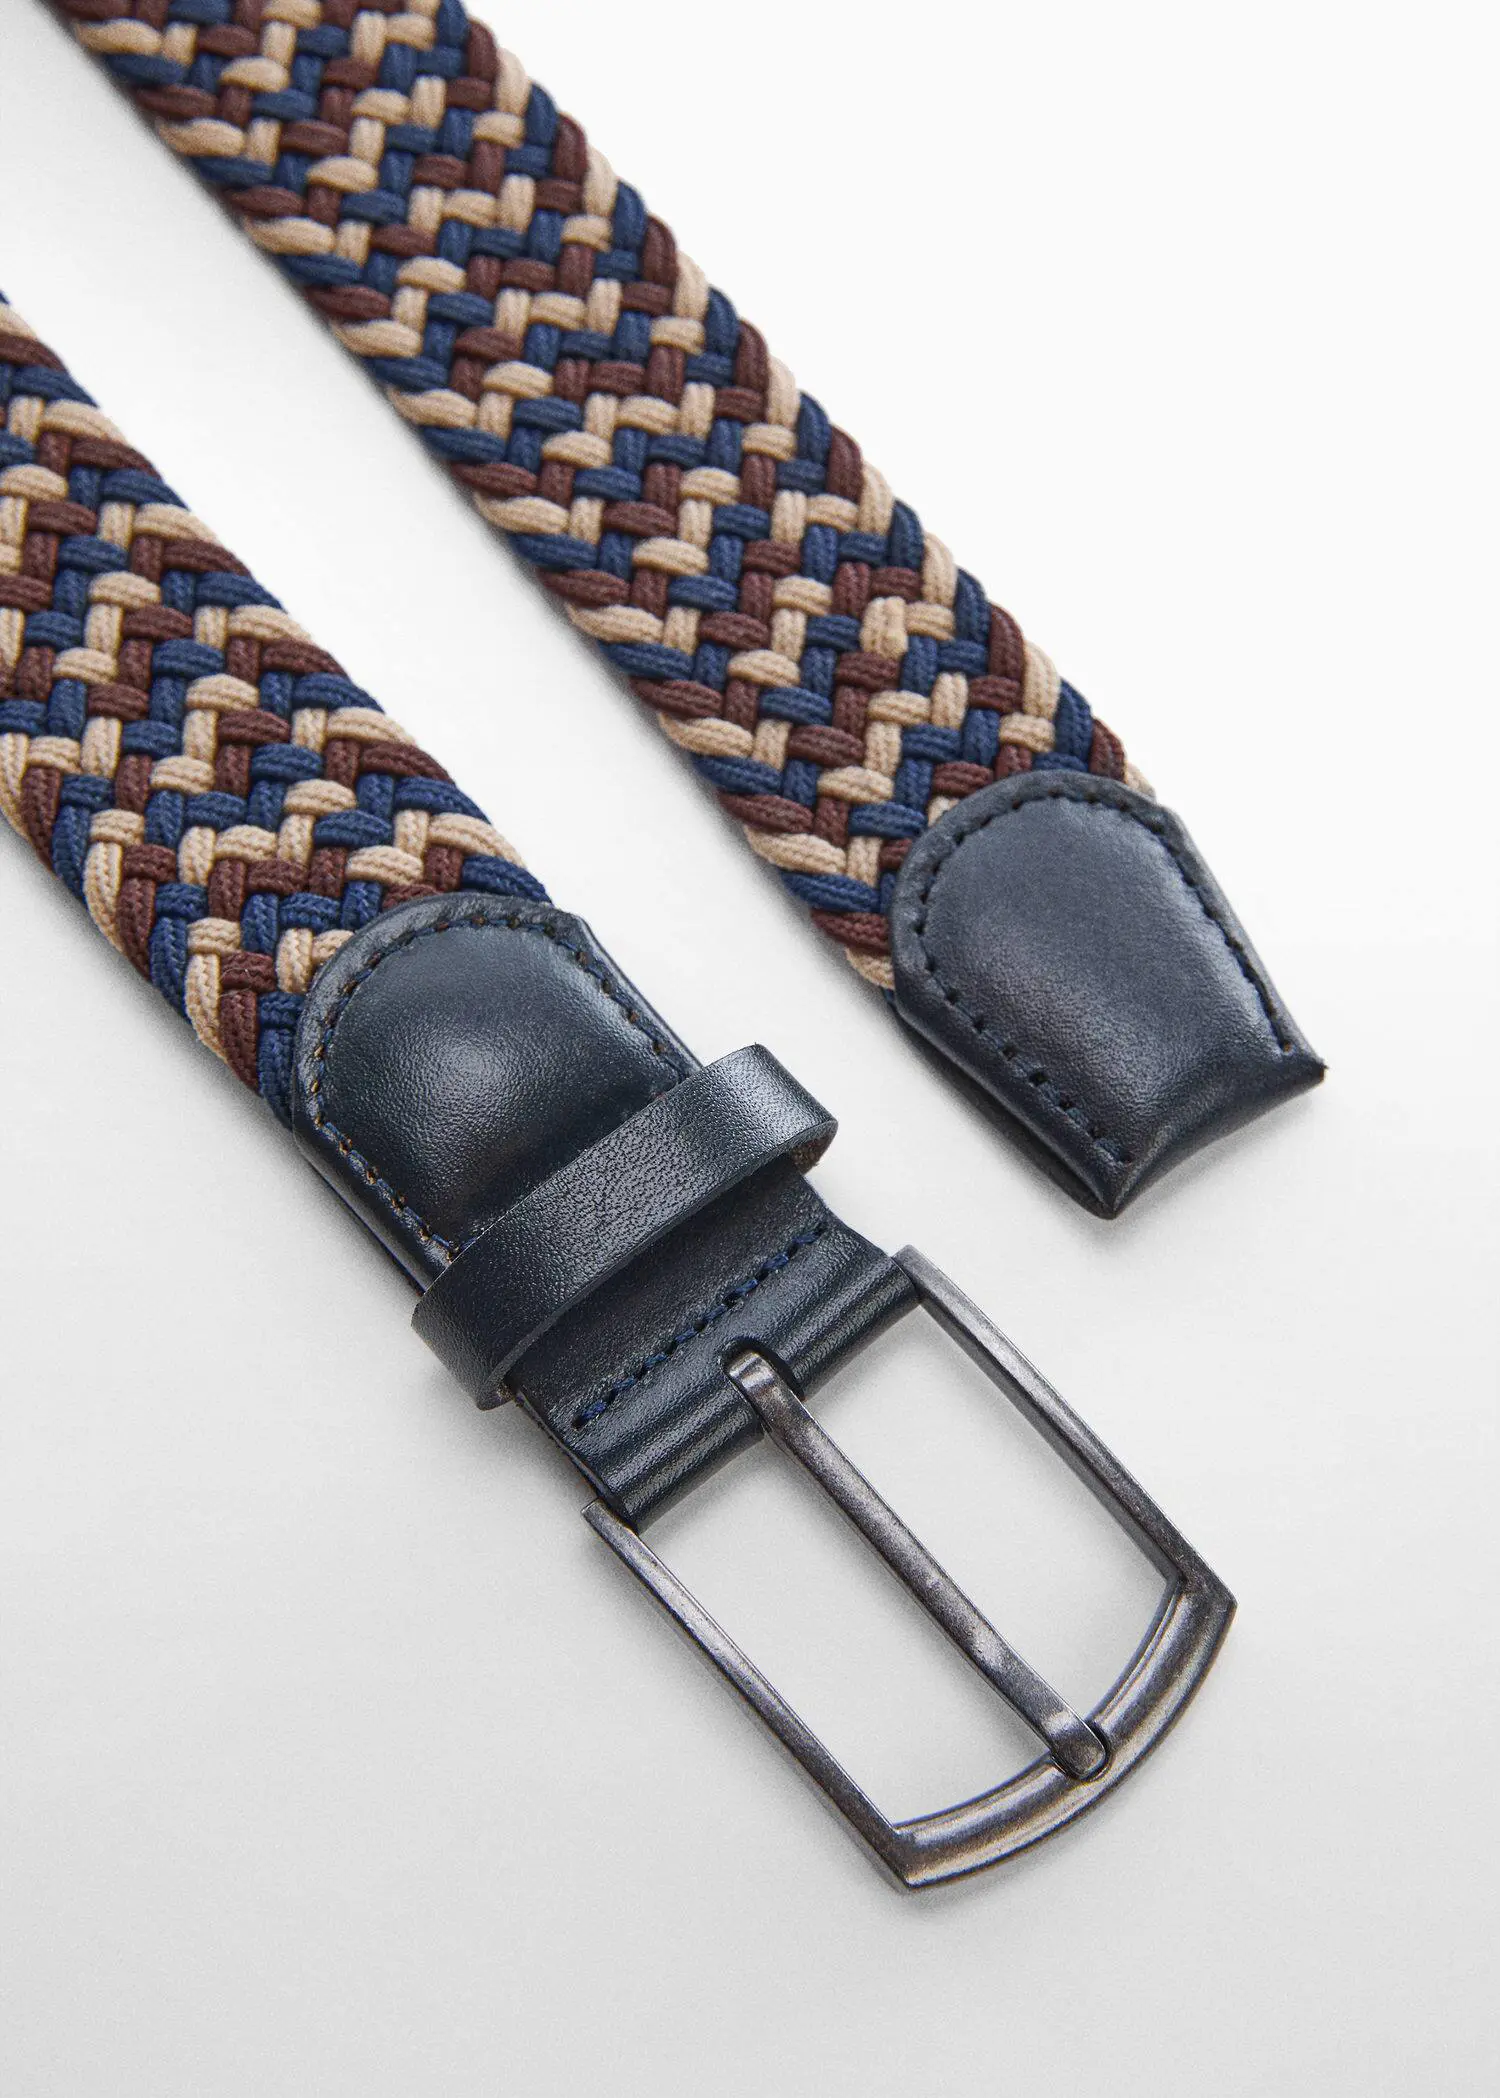 Mango Braided elastic colored belt. a close-up of a belt on a white surface. 